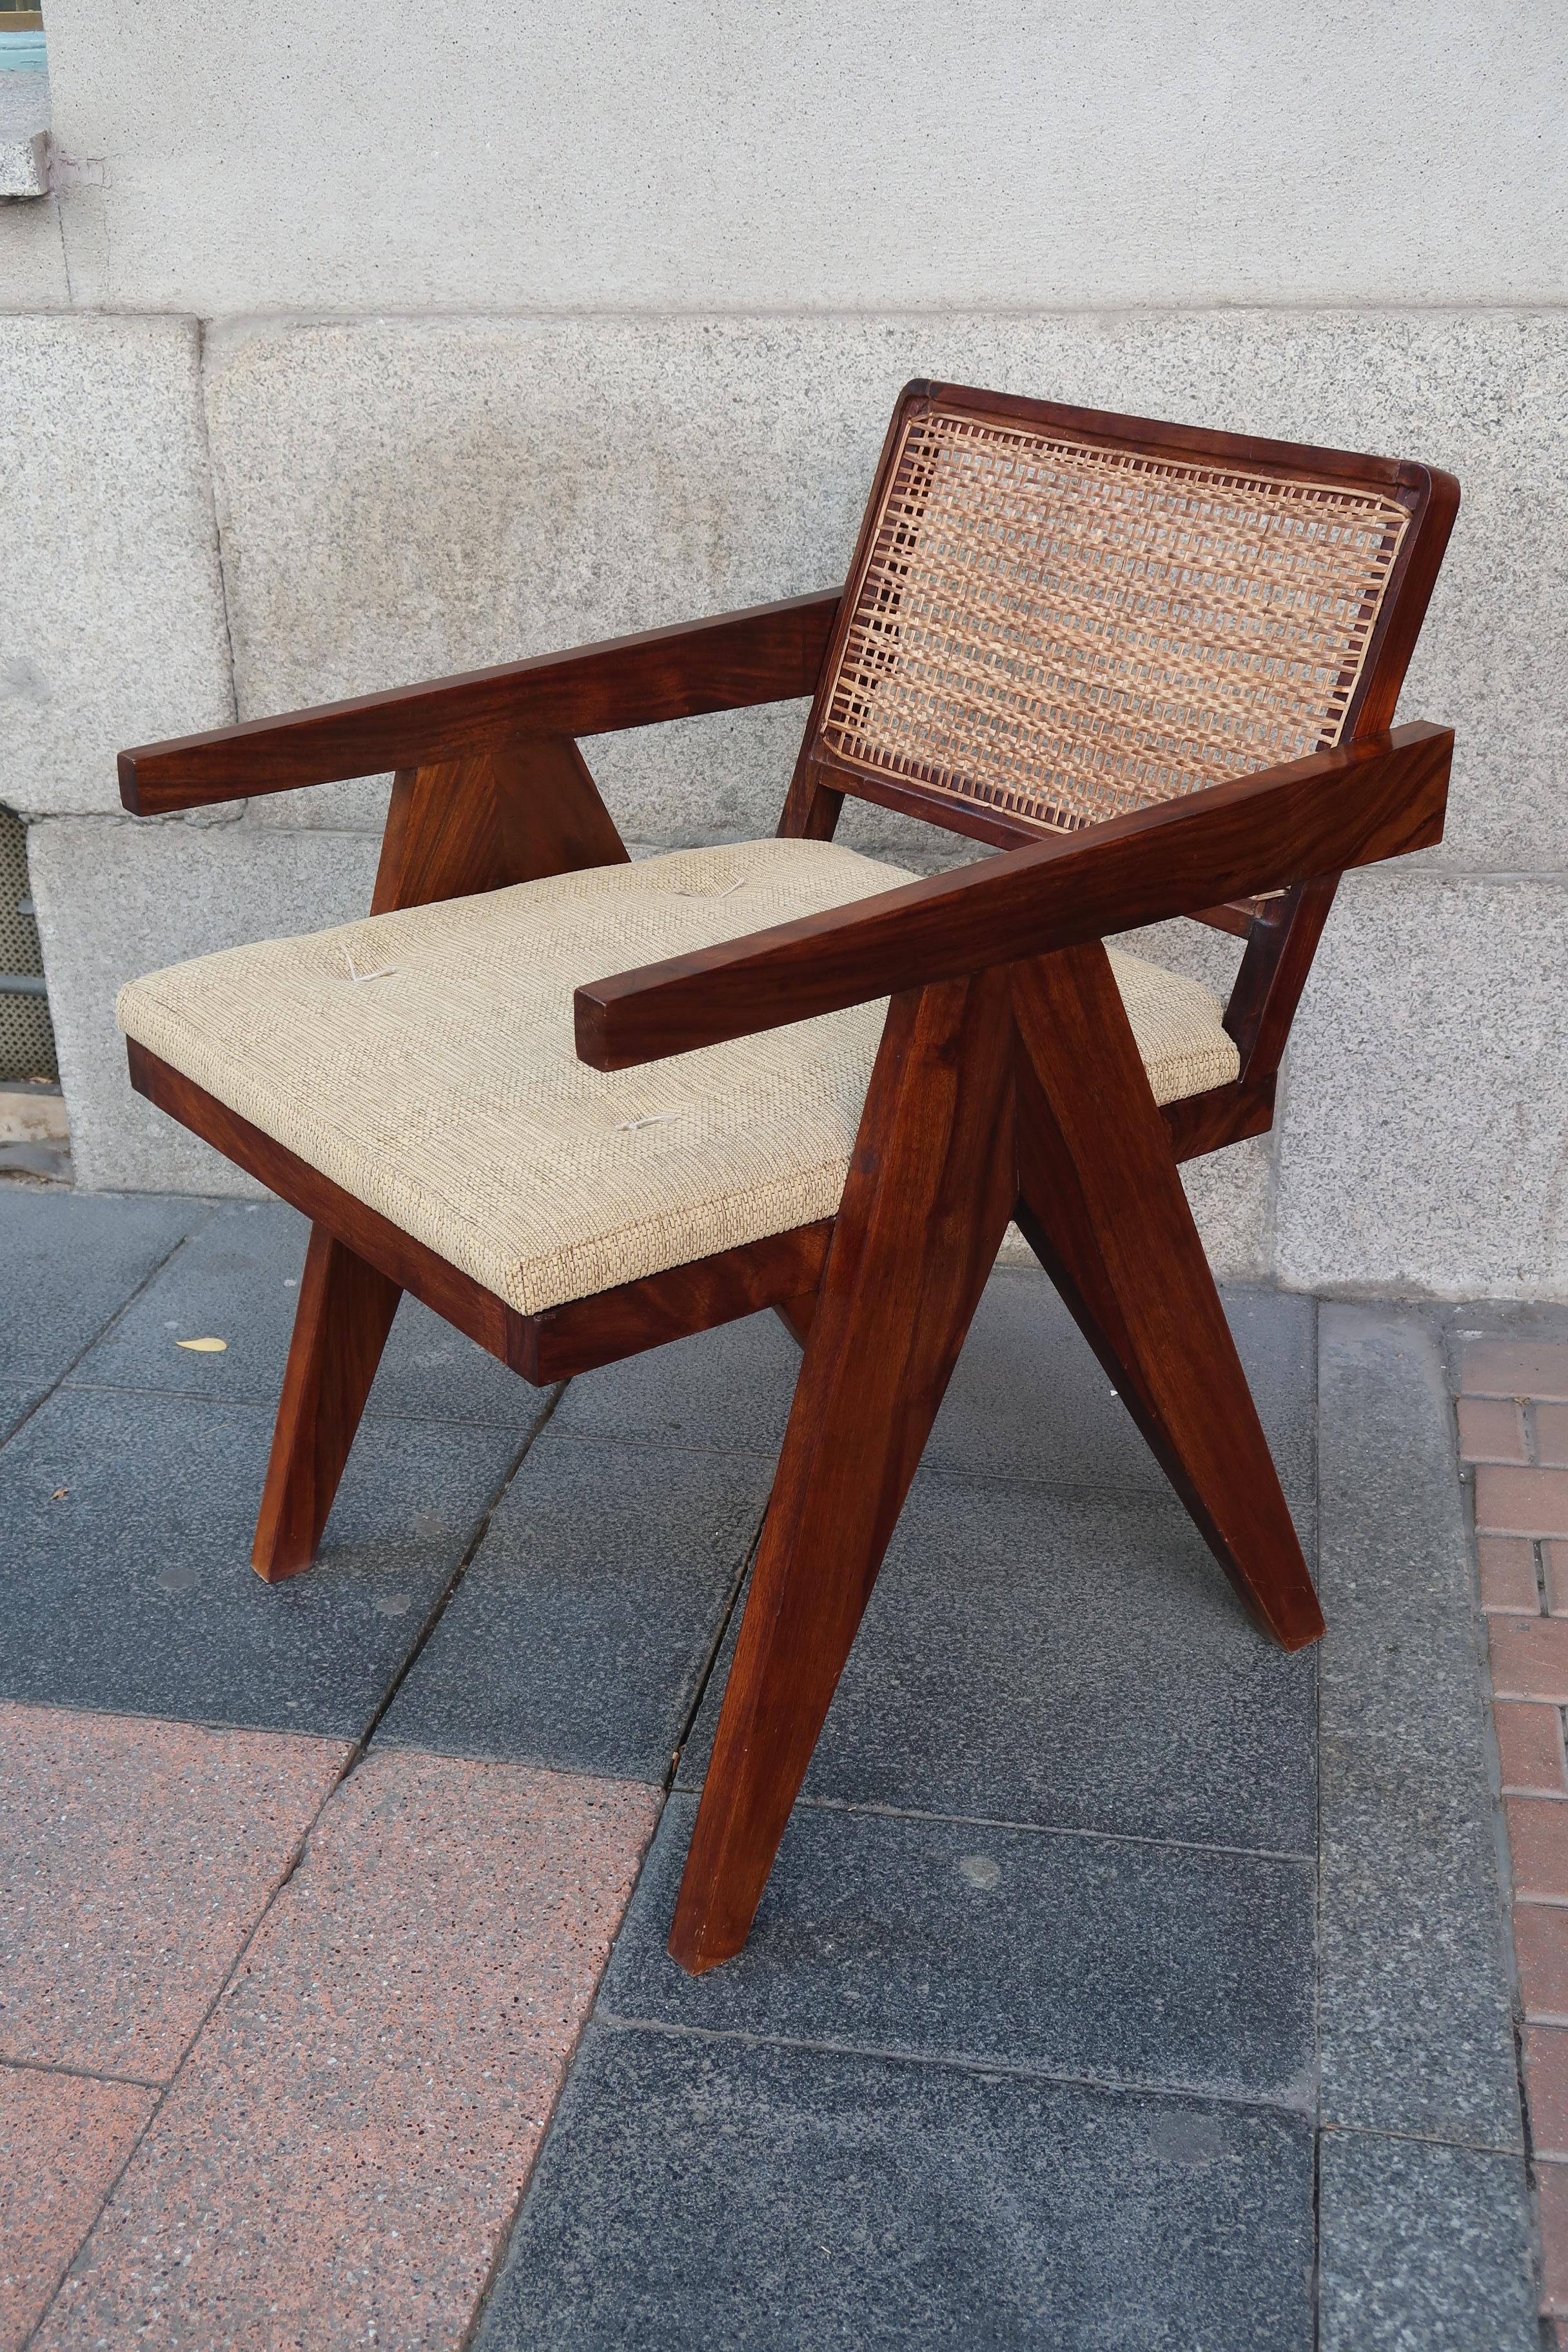 An Indian rosewood and bamboo modern chair in the style of Jeanneret, Chandigarh.